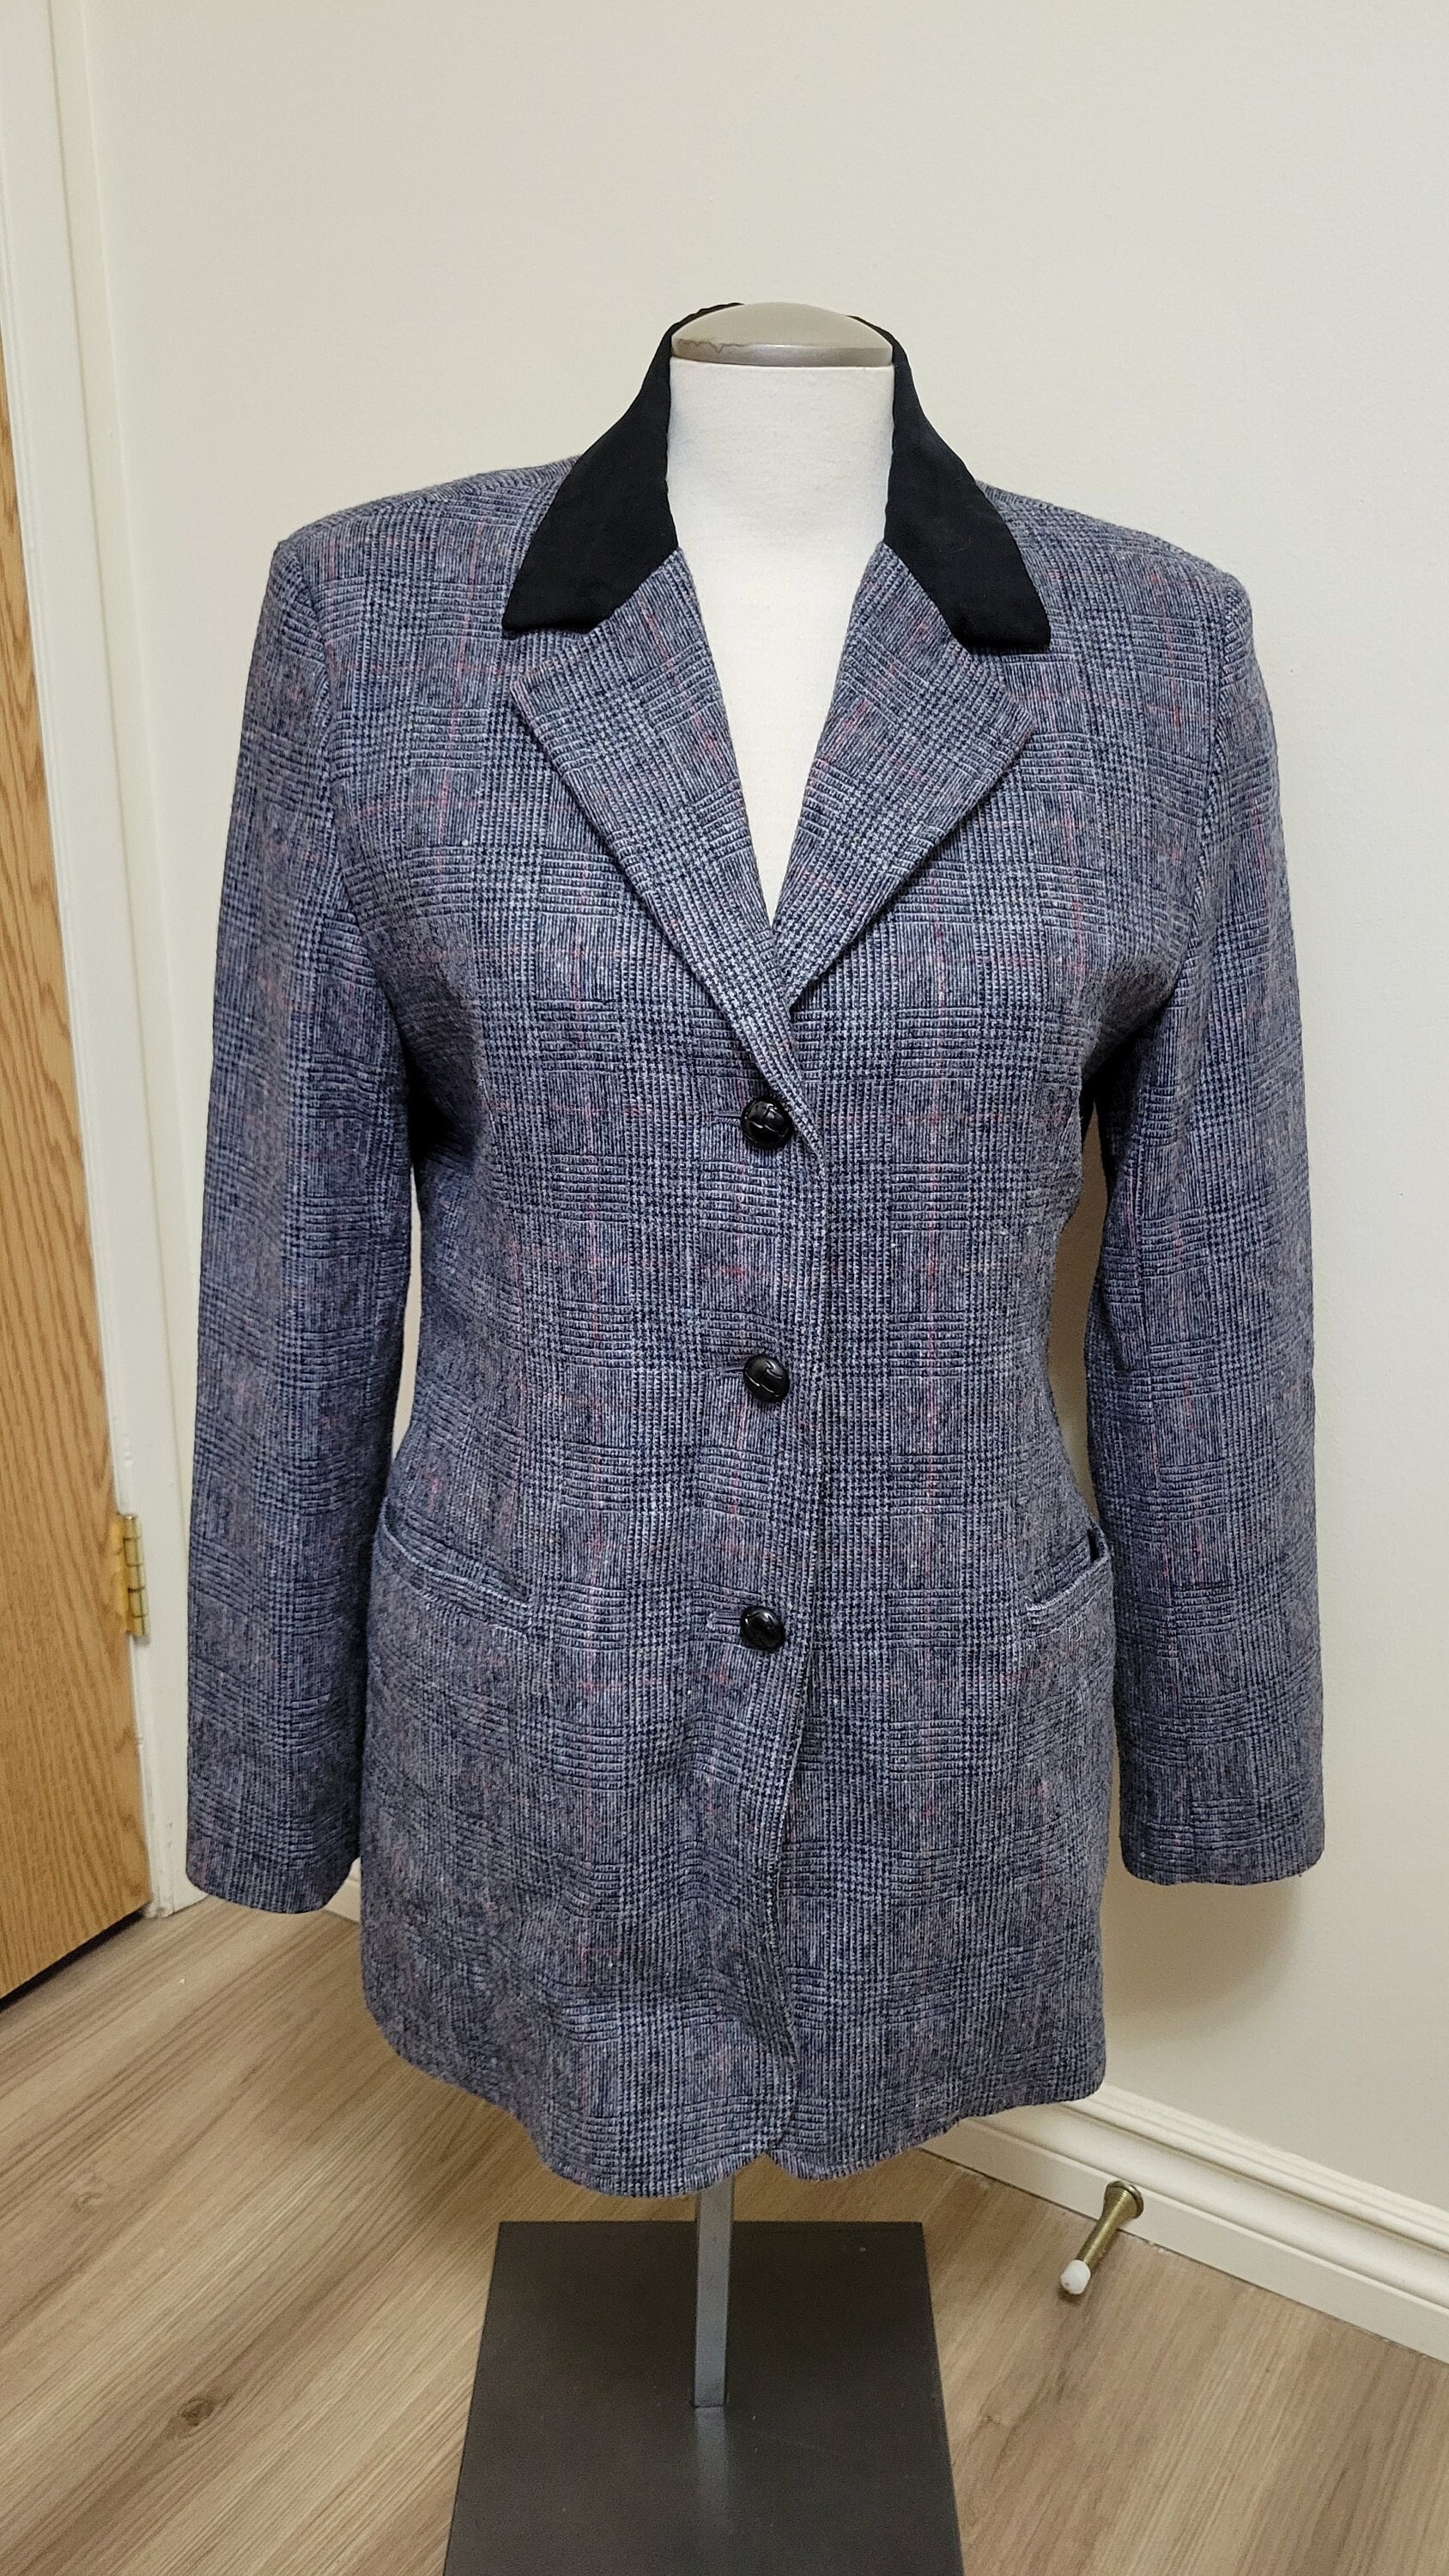 Tweed Jackets - How I'd style them 🫶, Gallery posted by Jess Green